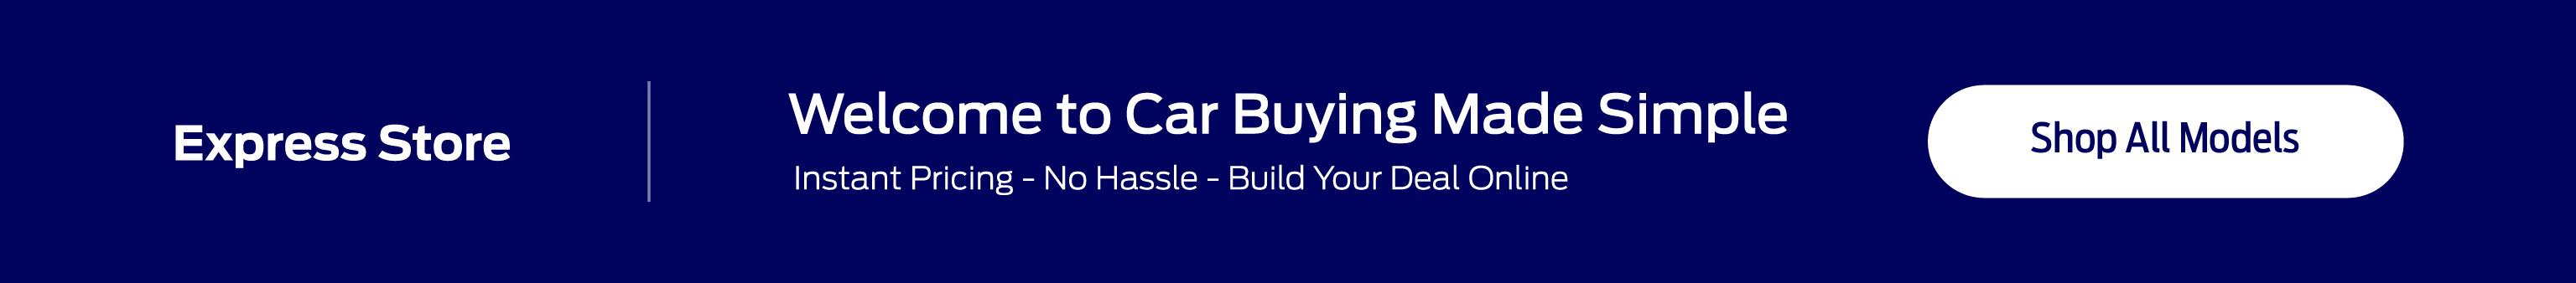 Express Store Welcome to Car Buying Made Simple Instant Pricing - No Hassle - Build Your Deal Online